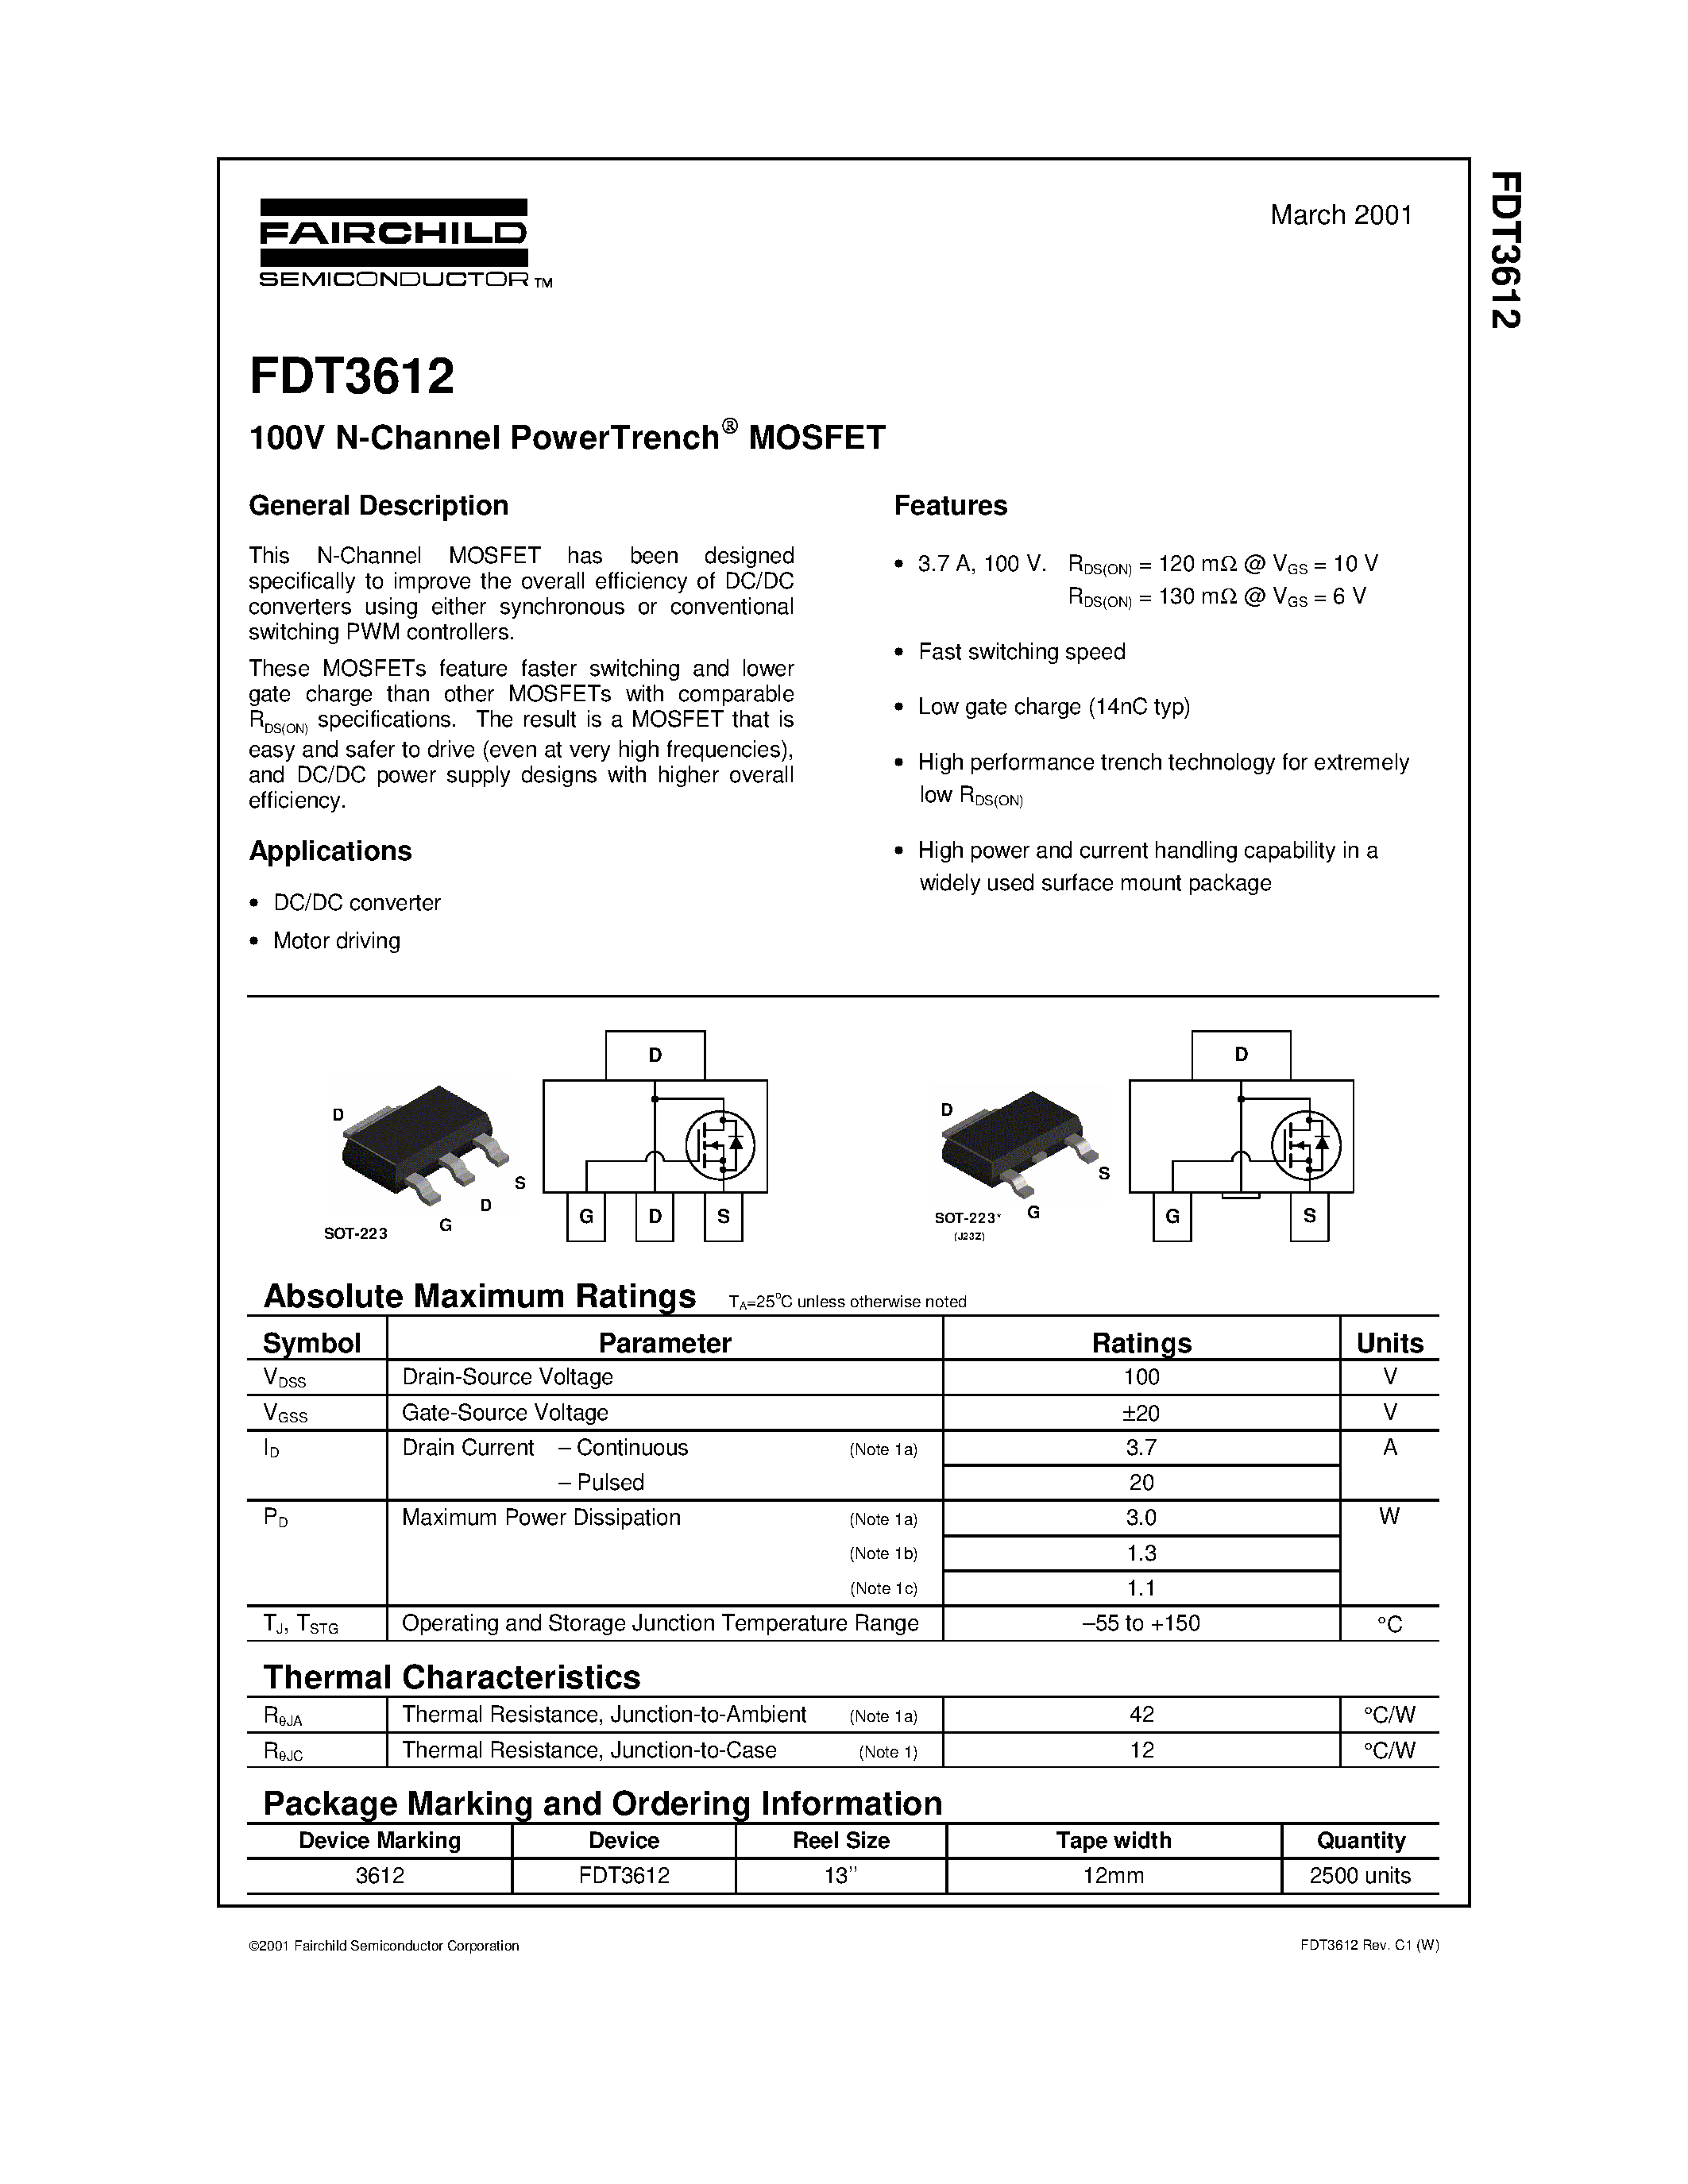 Даташит FDT3612-100V N-Channel PowerTrench MOSFET страница 1